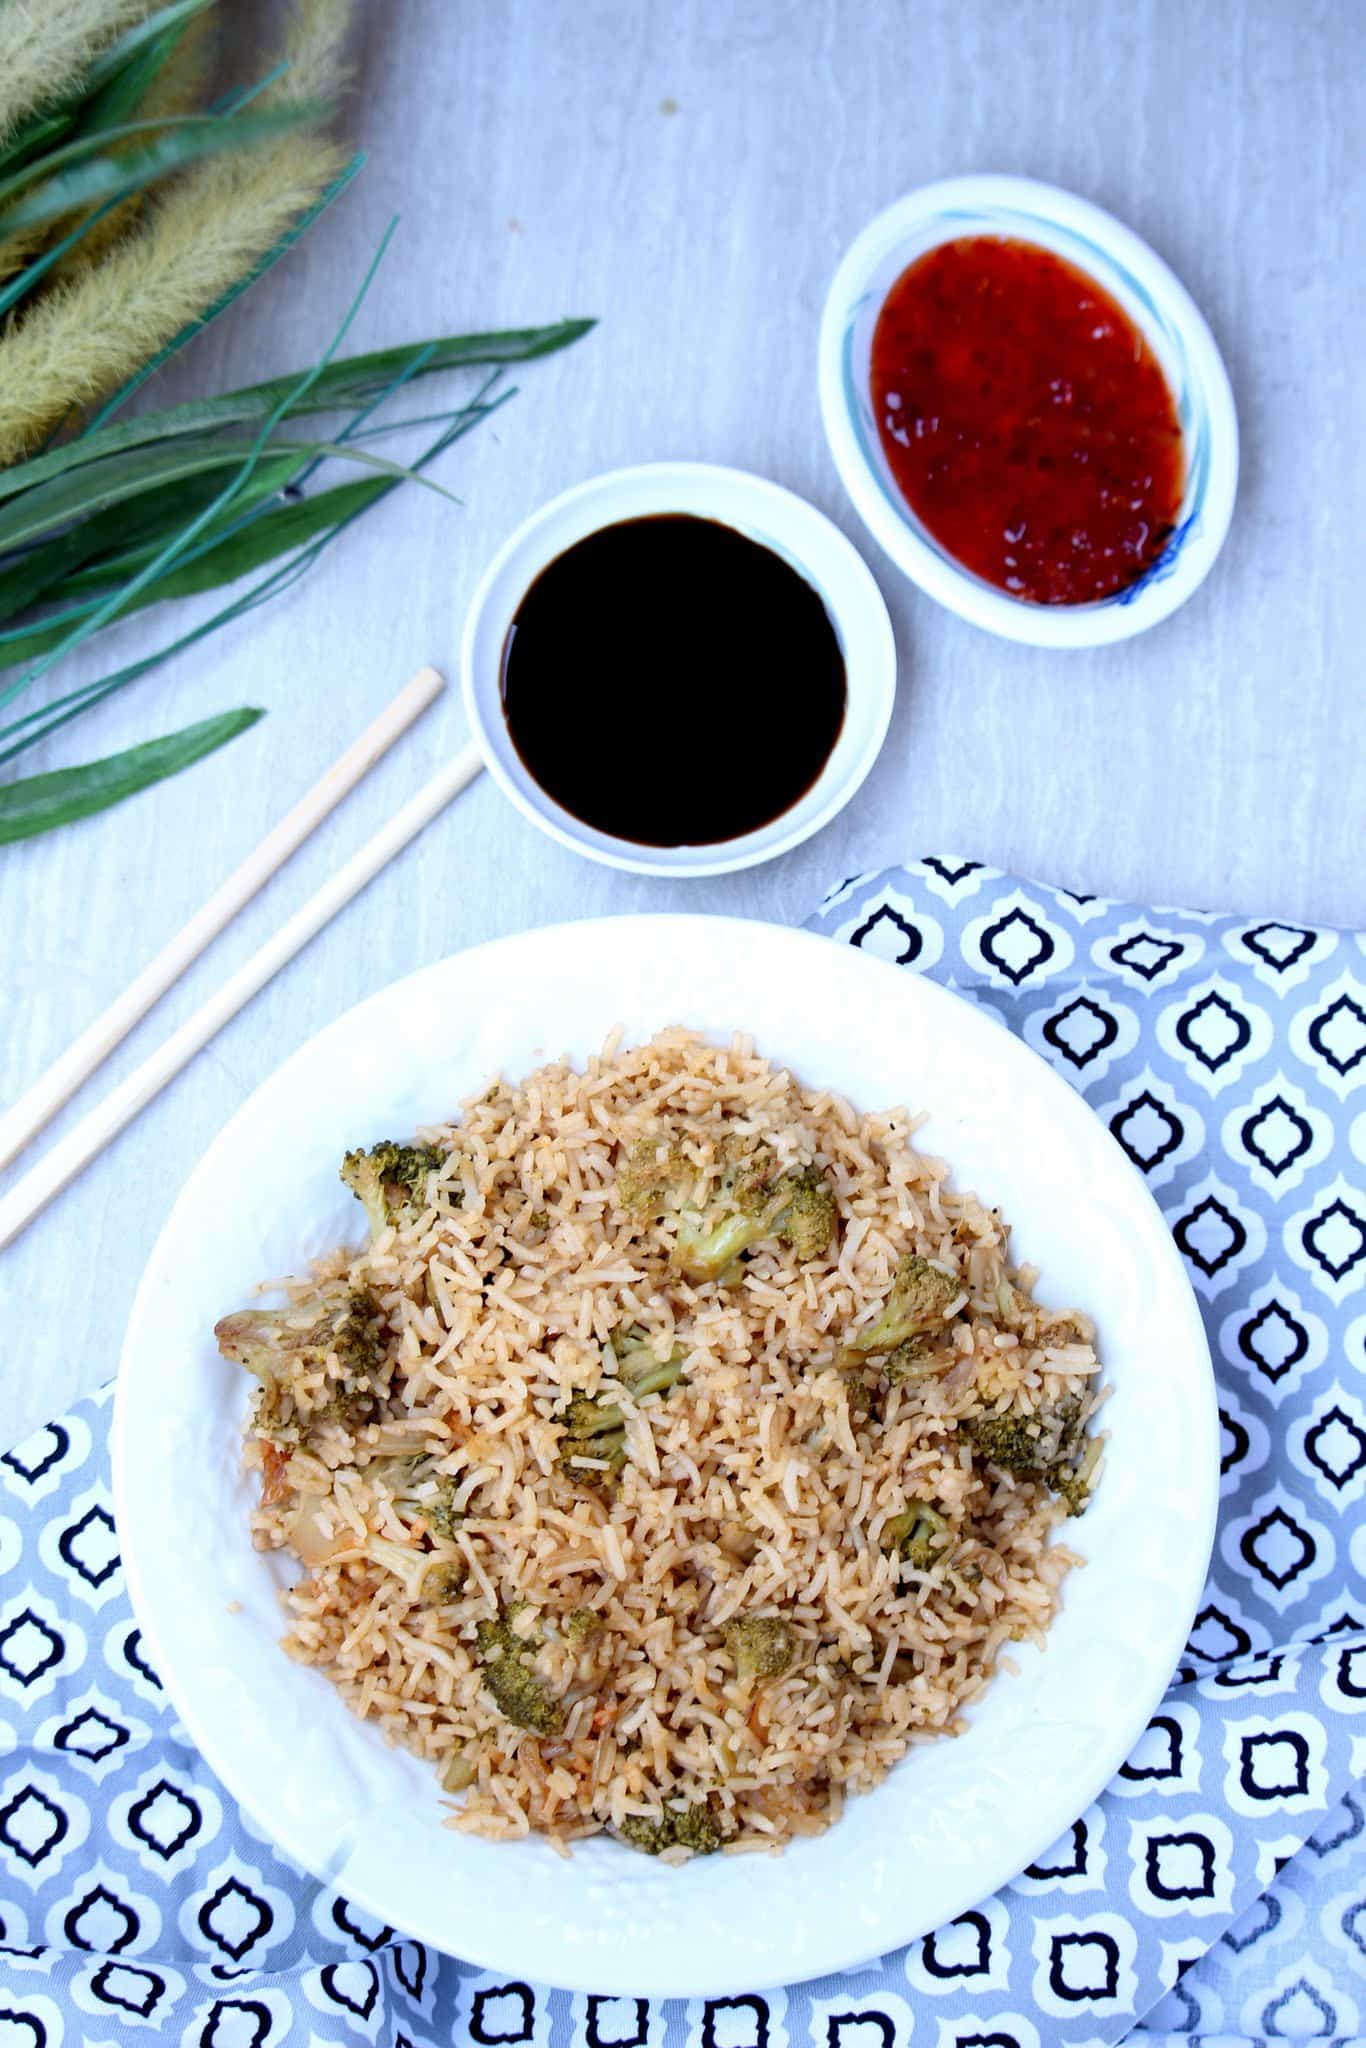 Broccoli Fried Rice with soy sauce and chili sauce on the background